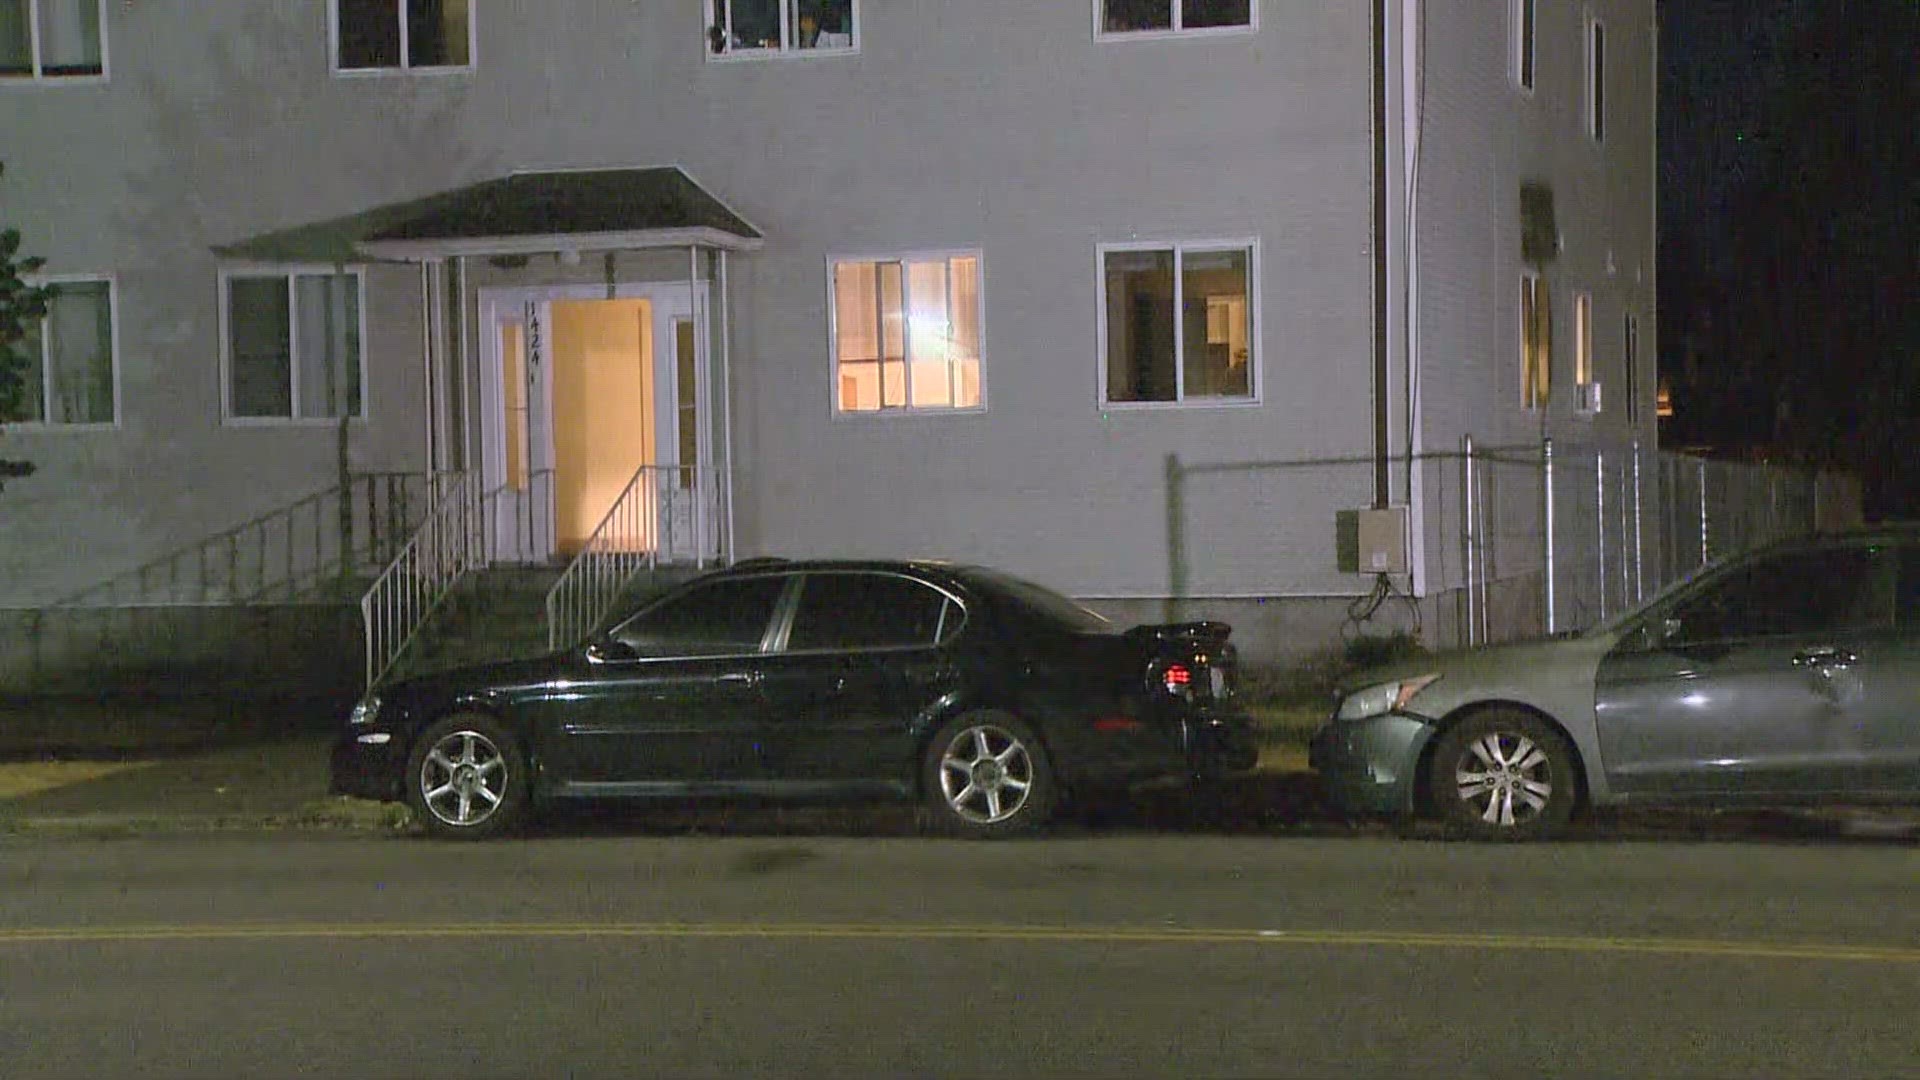 Tacoma police have yet to locate the suspect in a deadly shooting overnight.